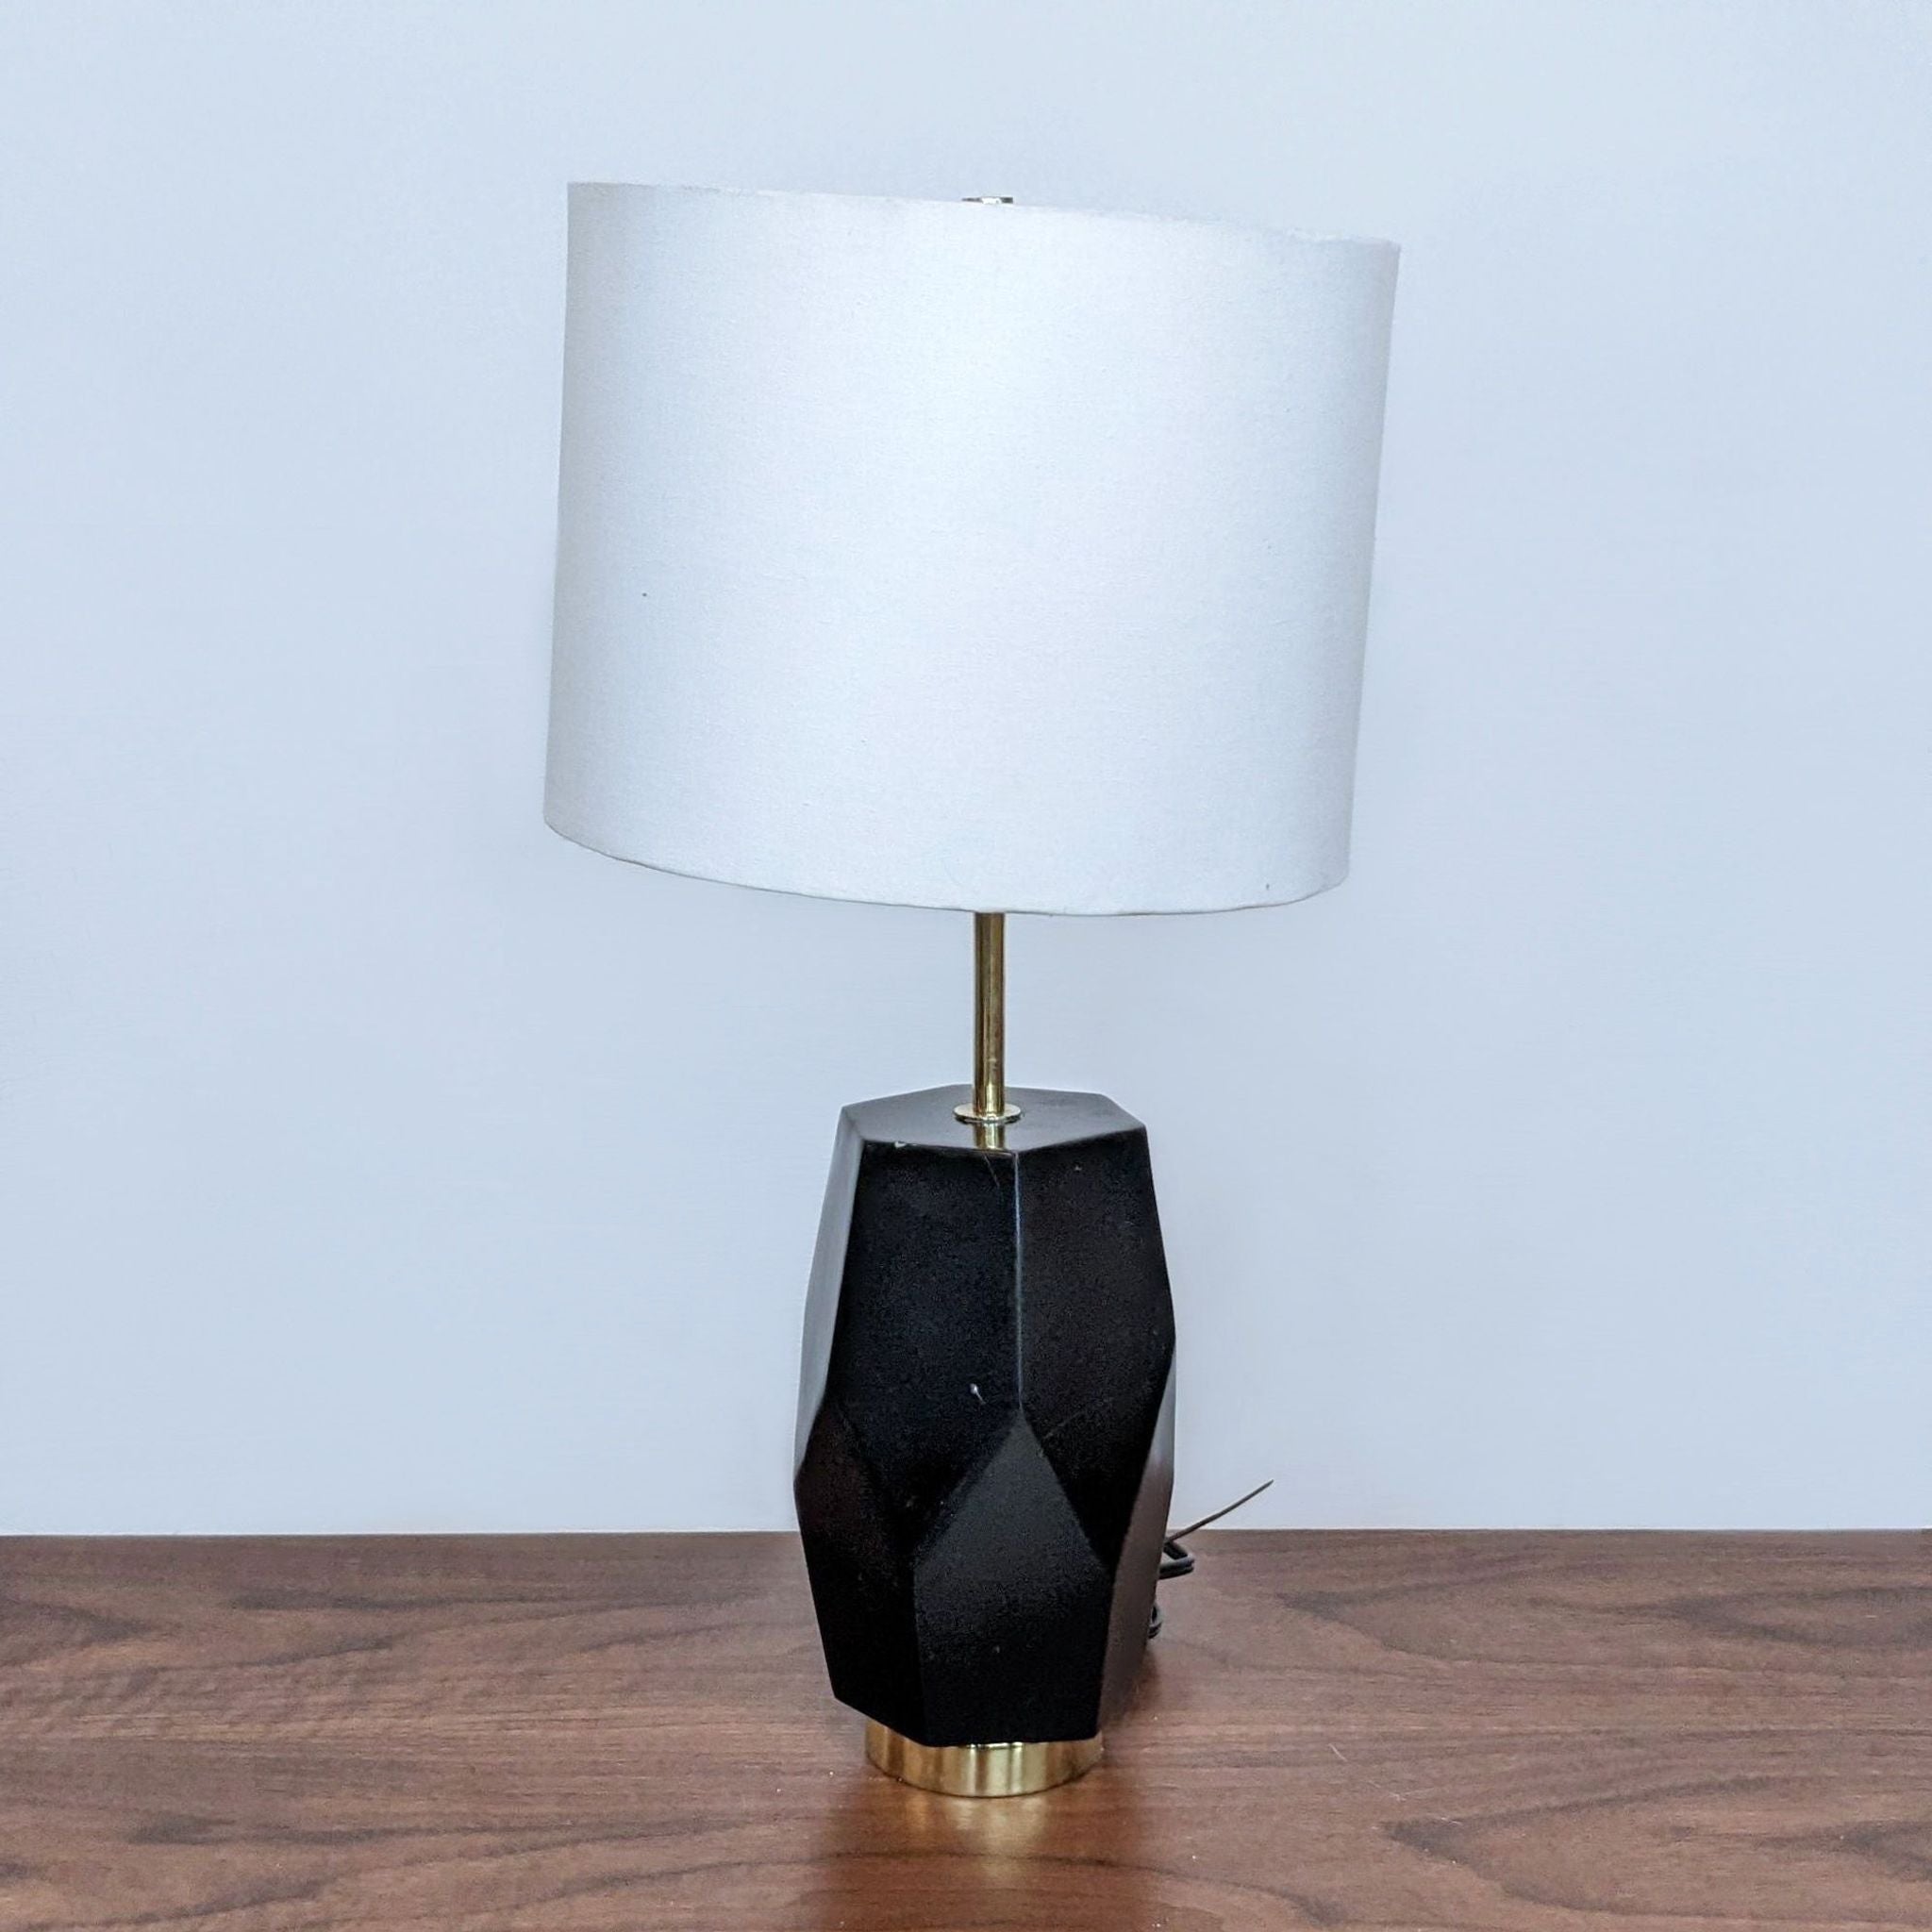 Reperch brand table lamp with a geometric black base and white shade on a wooden surface against a plain background.